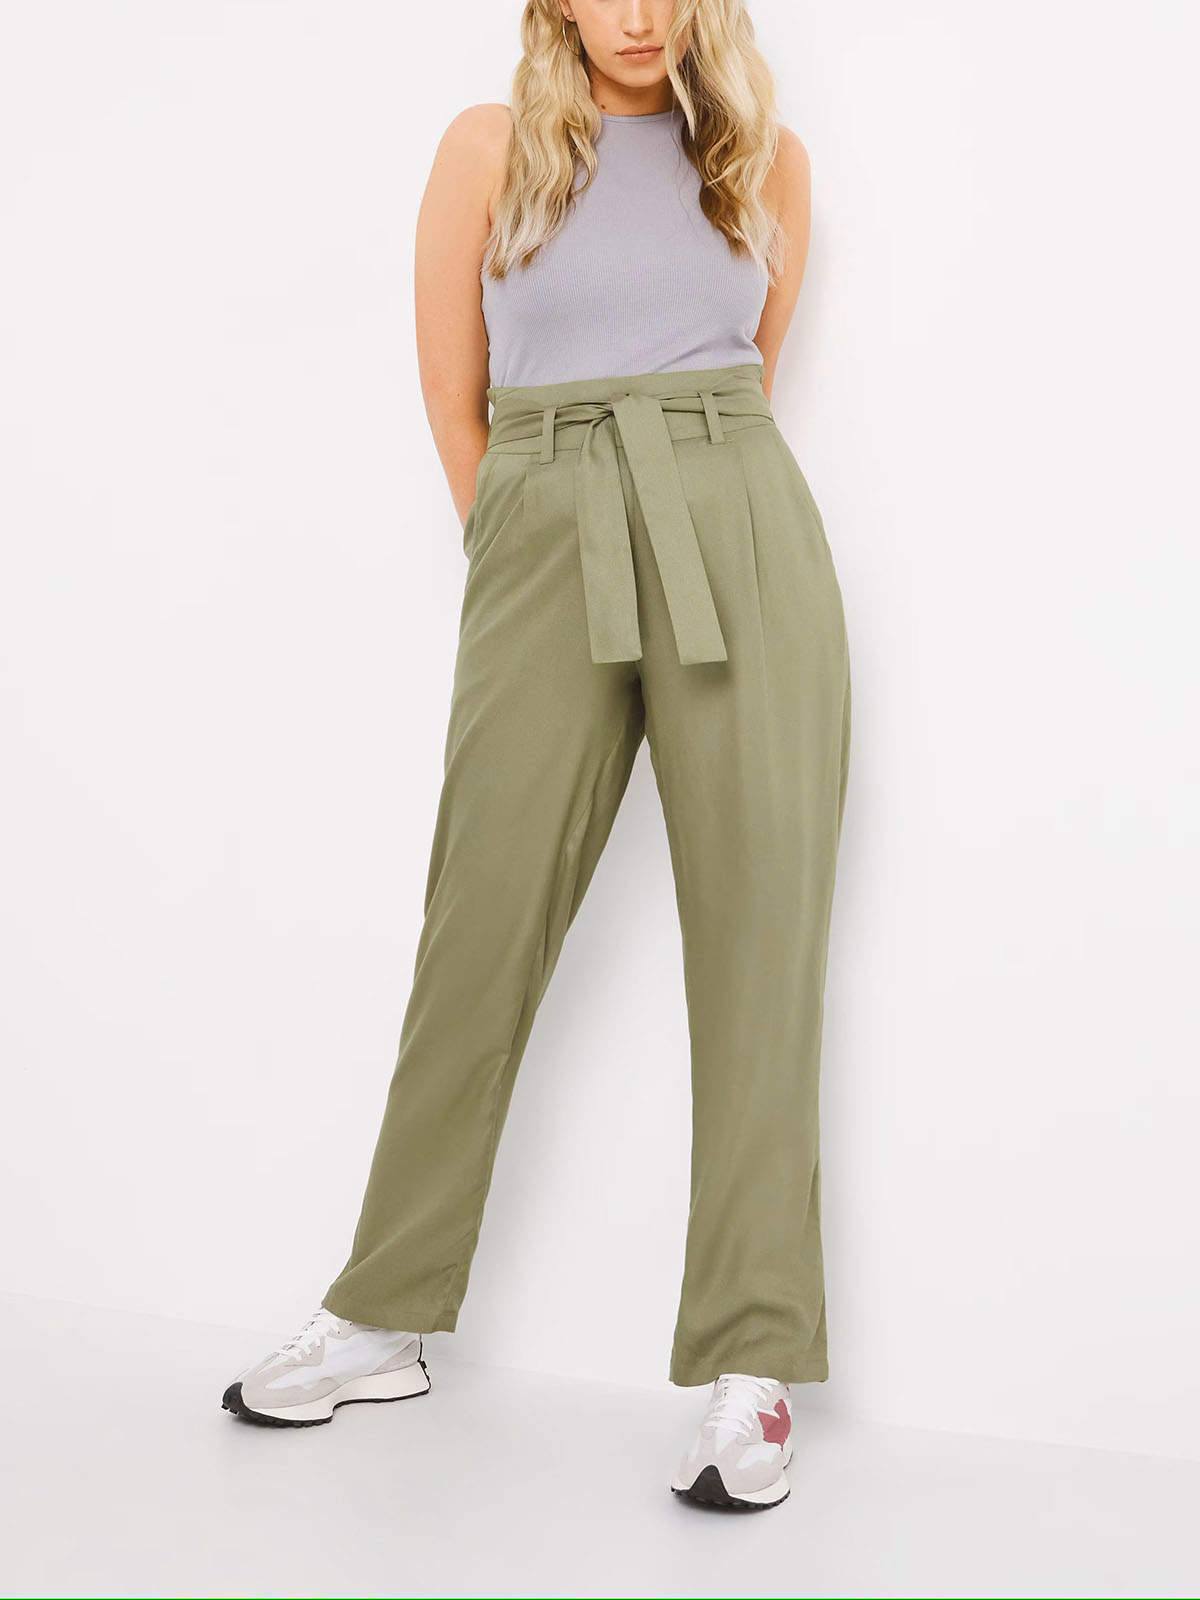 Plus Size wholesale clothing by simply be - - KHAKI Tie Waist Trousers - Plus  Size 14 to 20